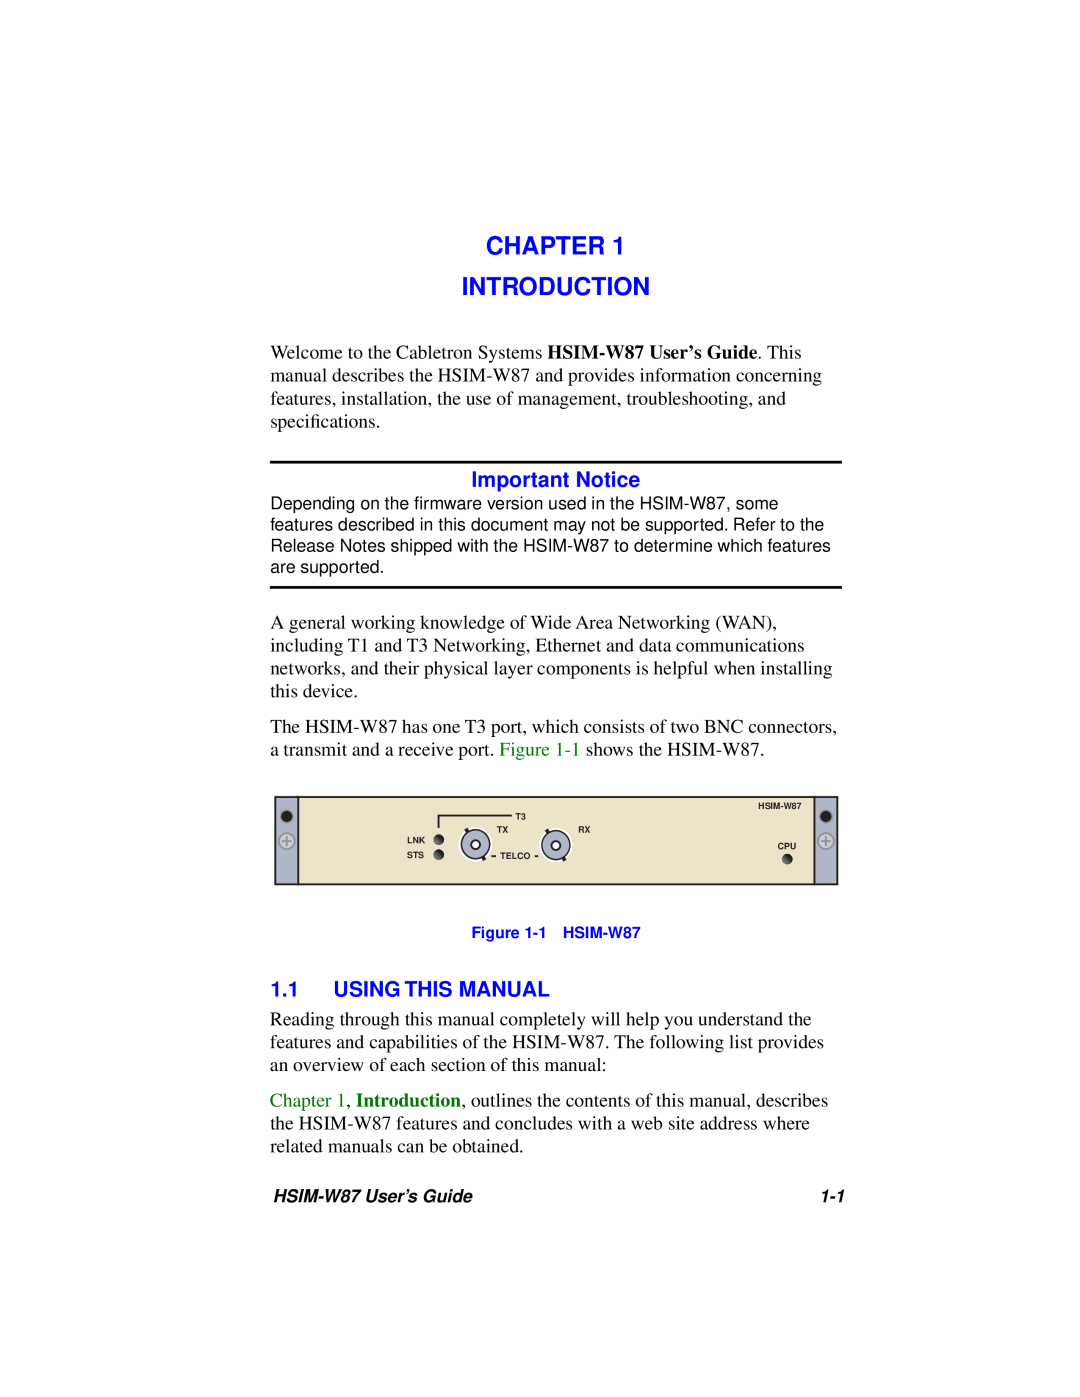 Cabletron Systems HSIM-W87 manual Chapter Introduction, Important Notice, Using This Manual 